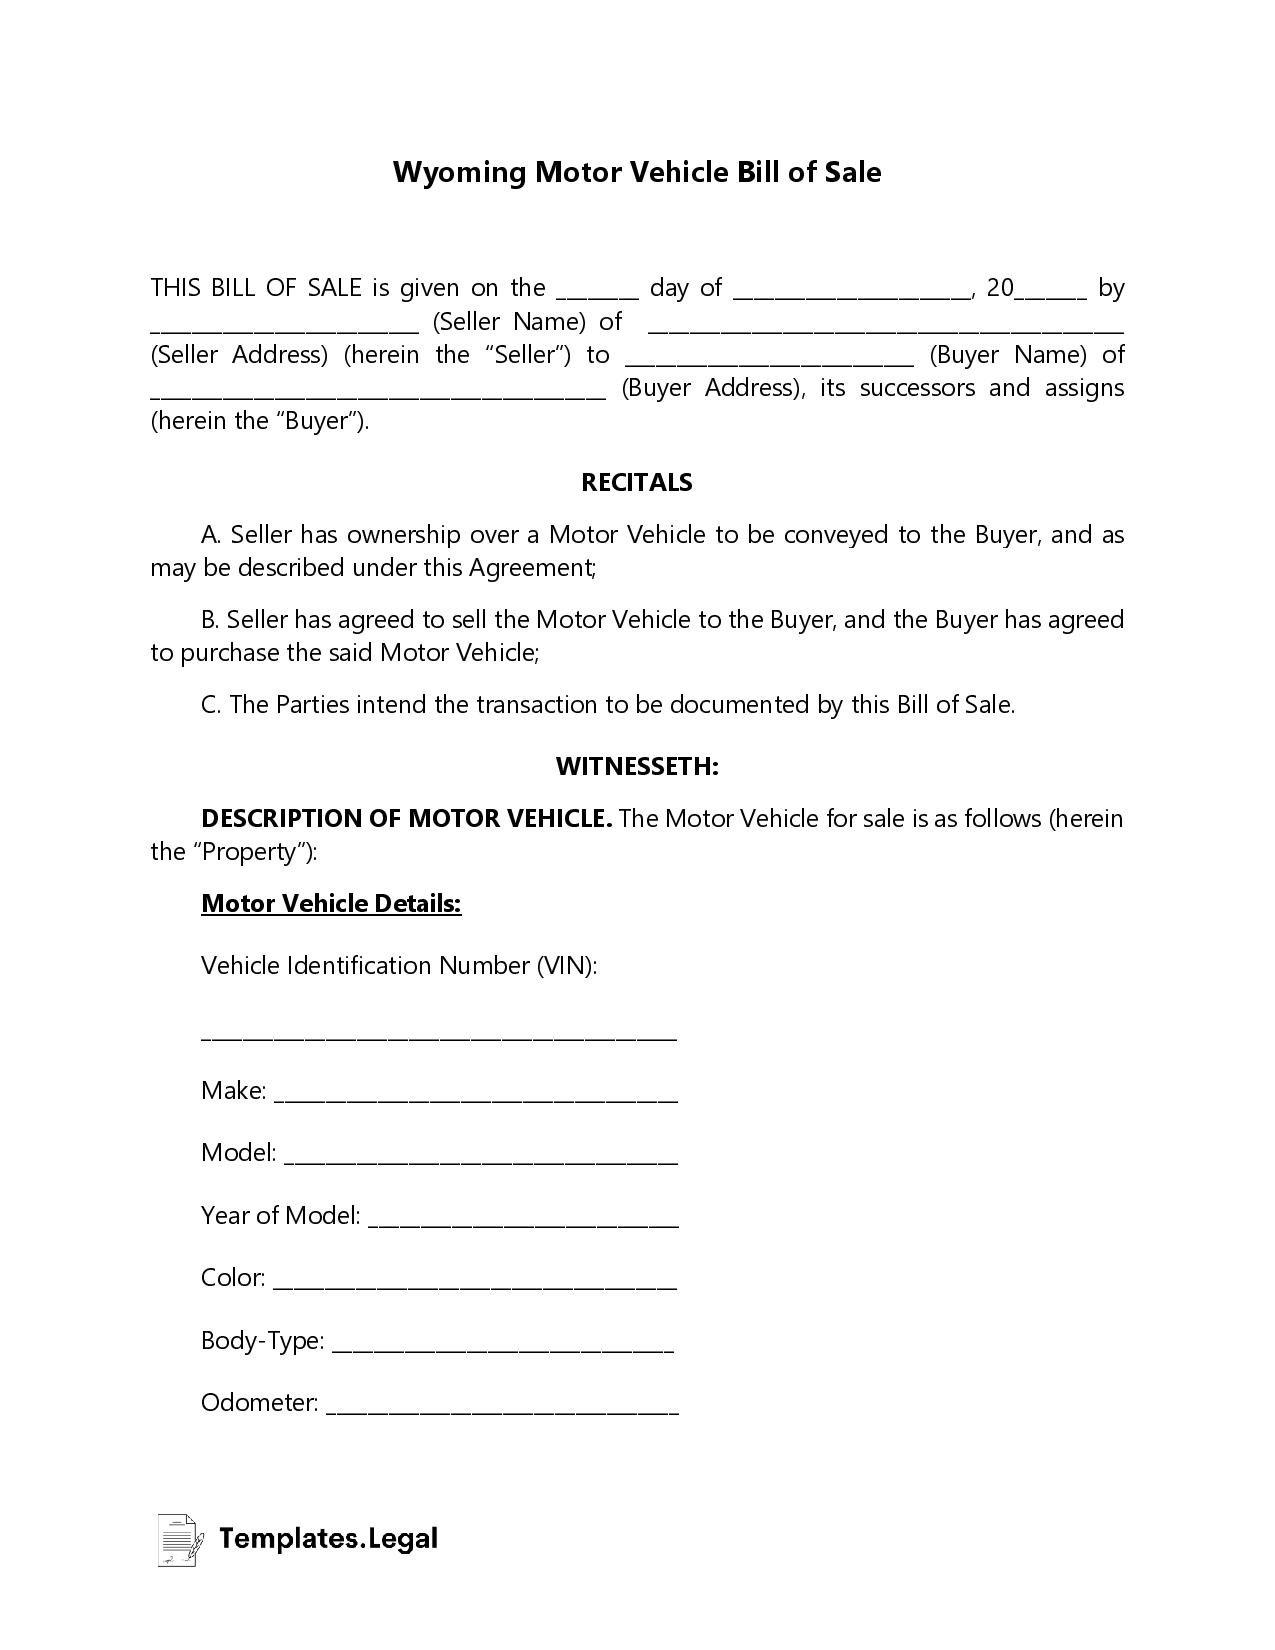 Wyoming Motor Vehicle Bill of Sale - Templates.Legal